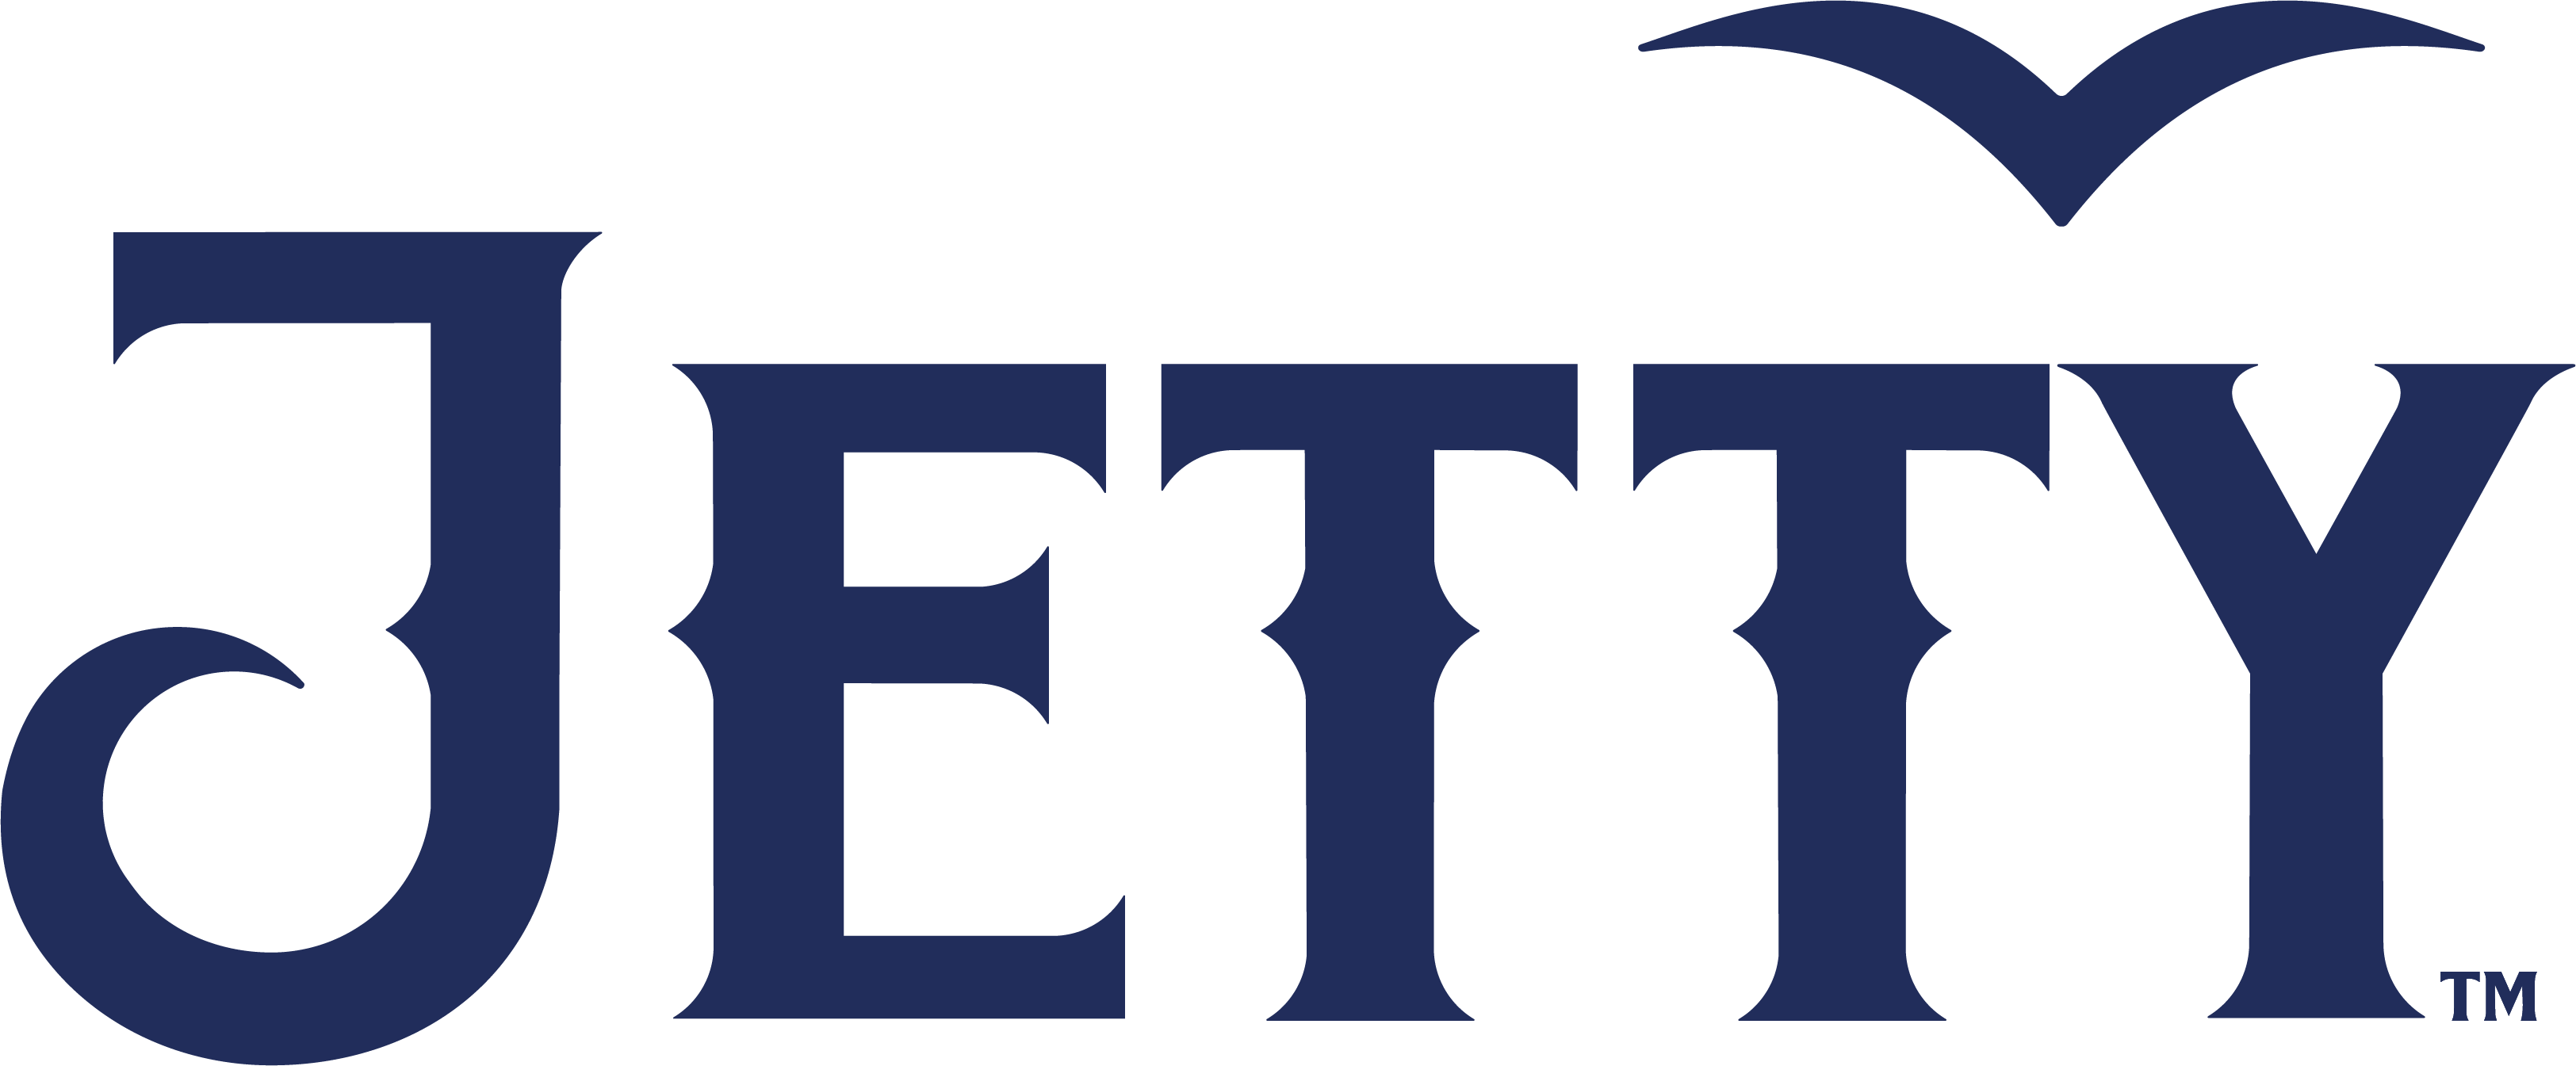 The logo of Jetty Extracts